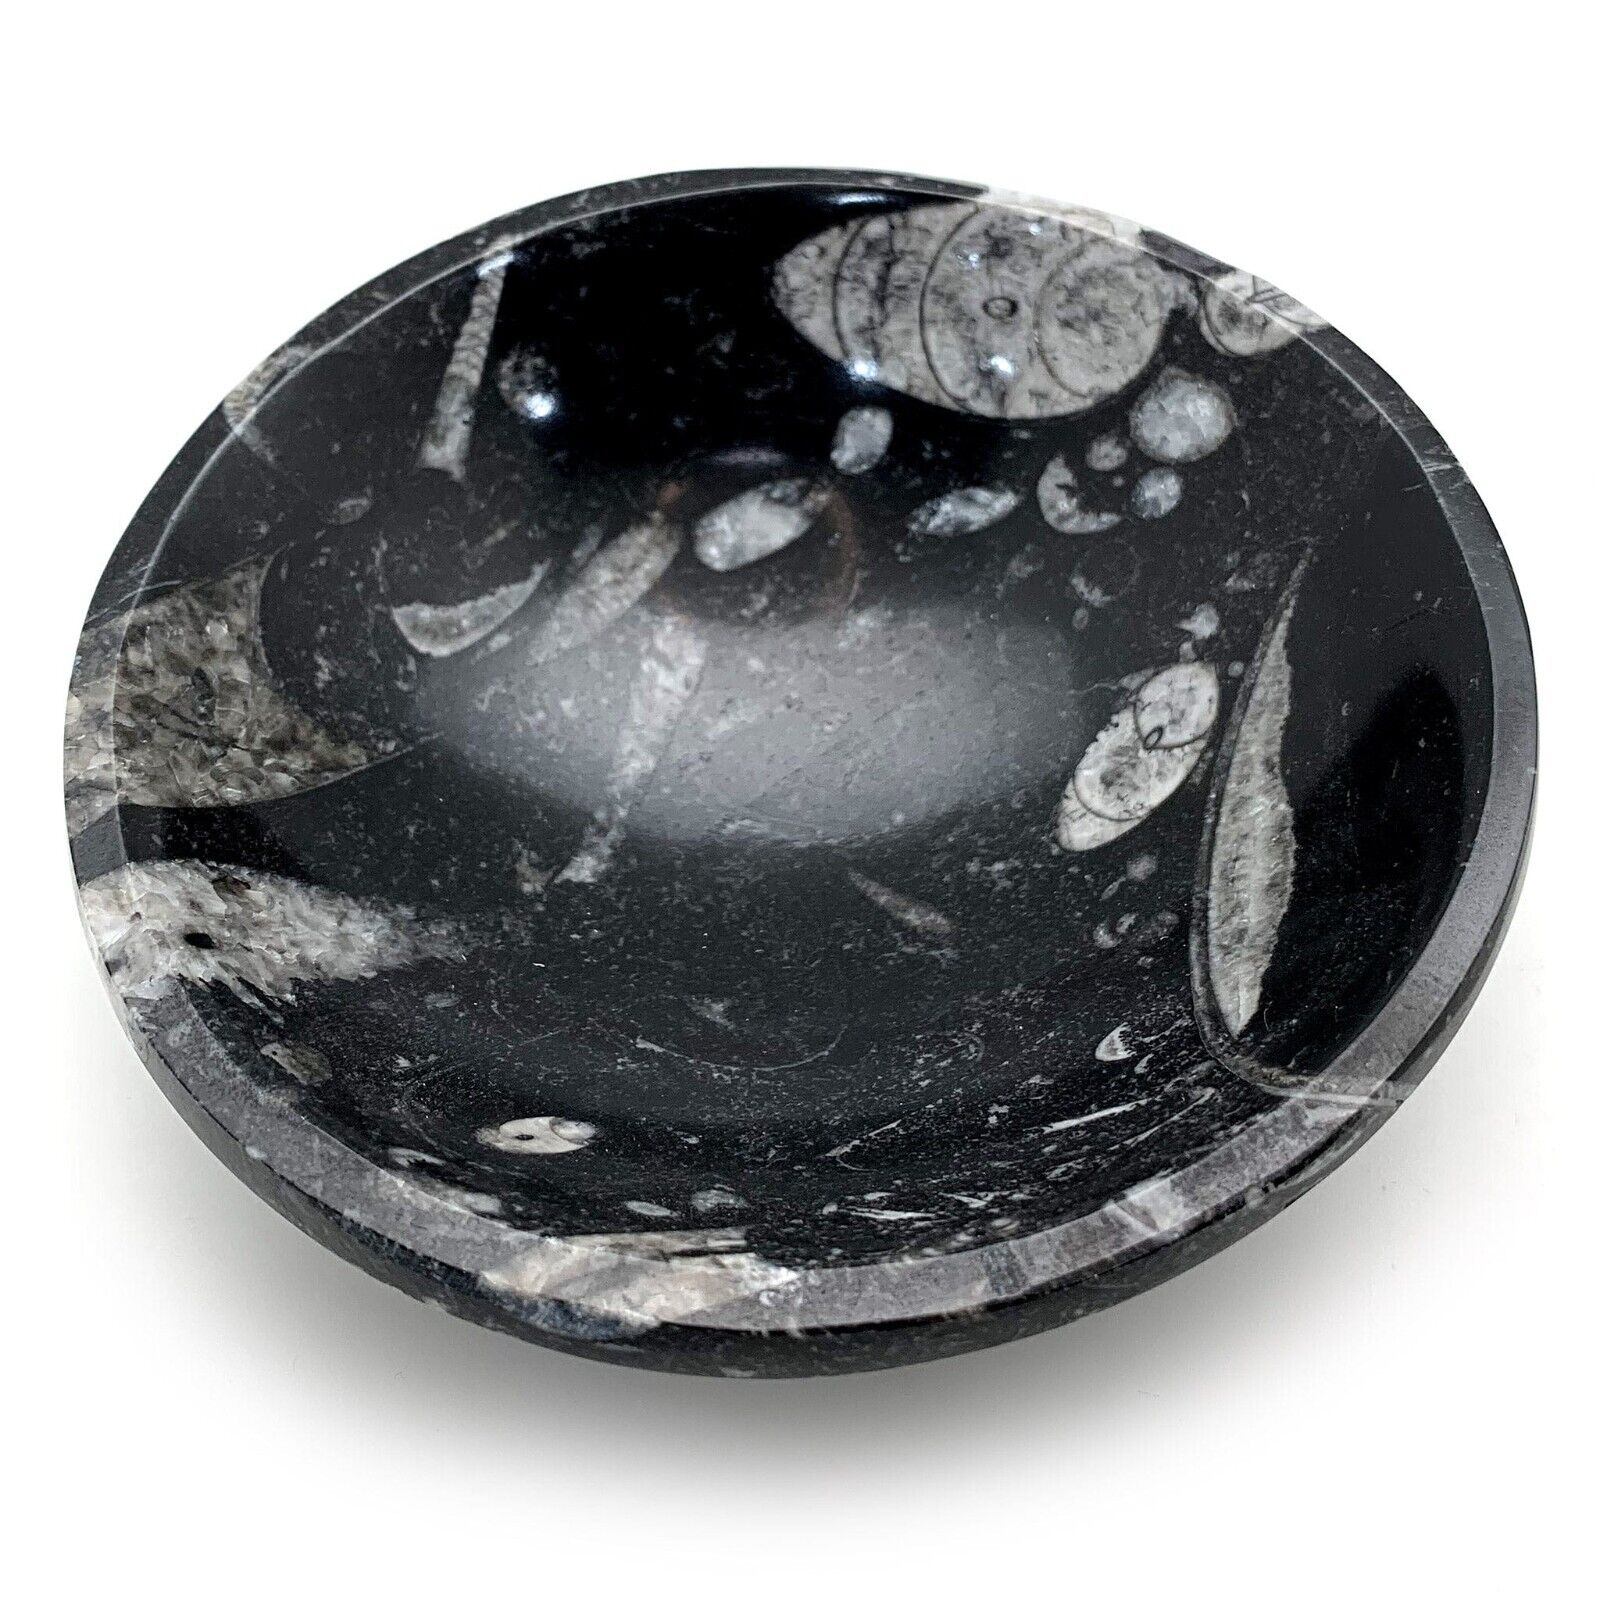 Fossil Orthoceras Bowl | Crystal Charging Bowl Natural Gemstone Jewelry Bowl